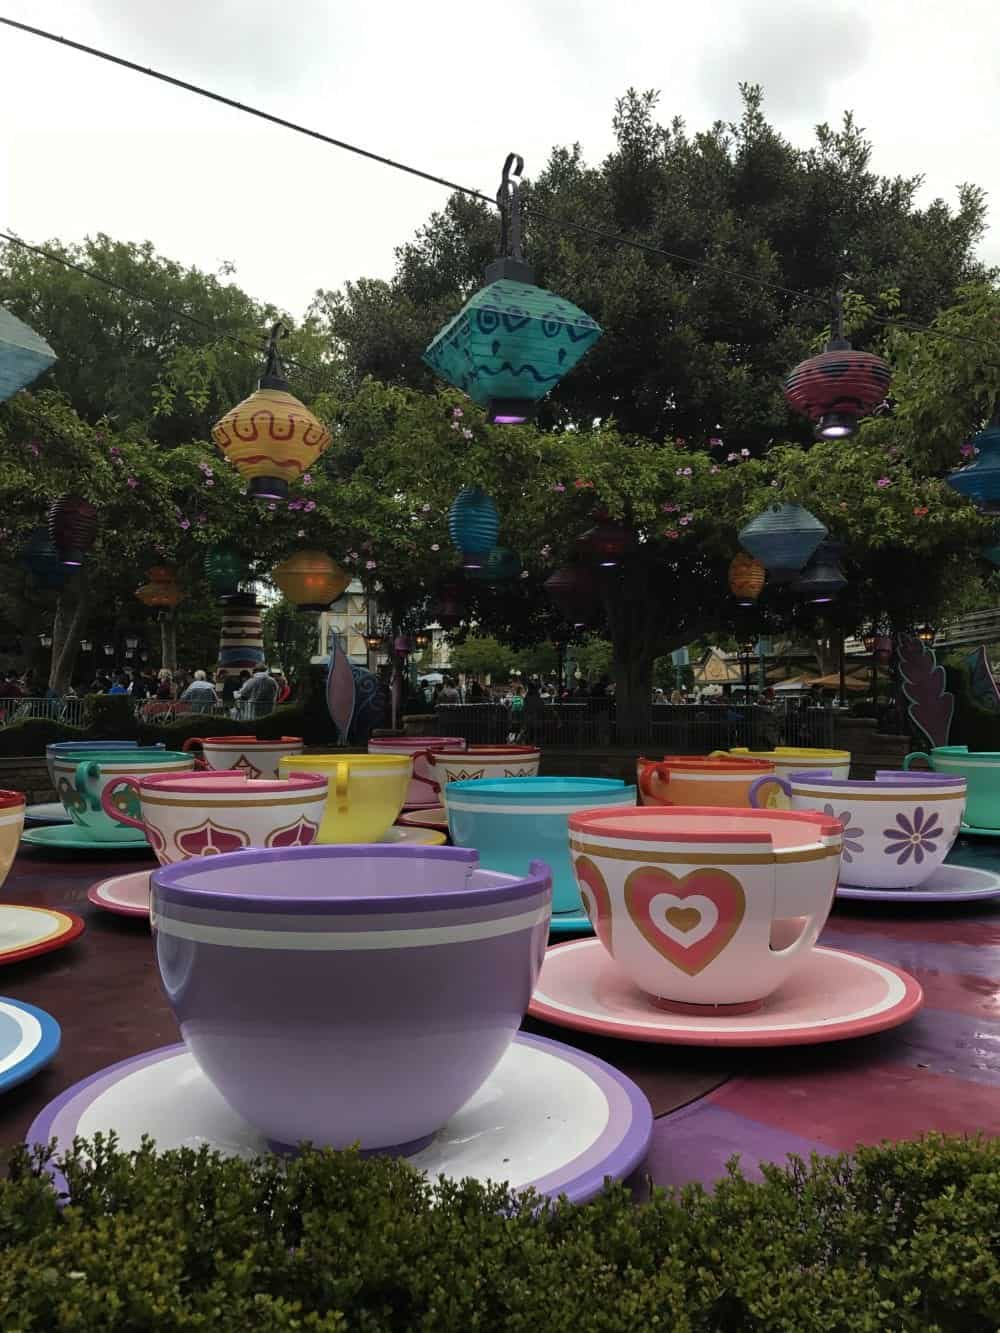 Tips For Visiting Disneyland In The Rain - Picky Palate